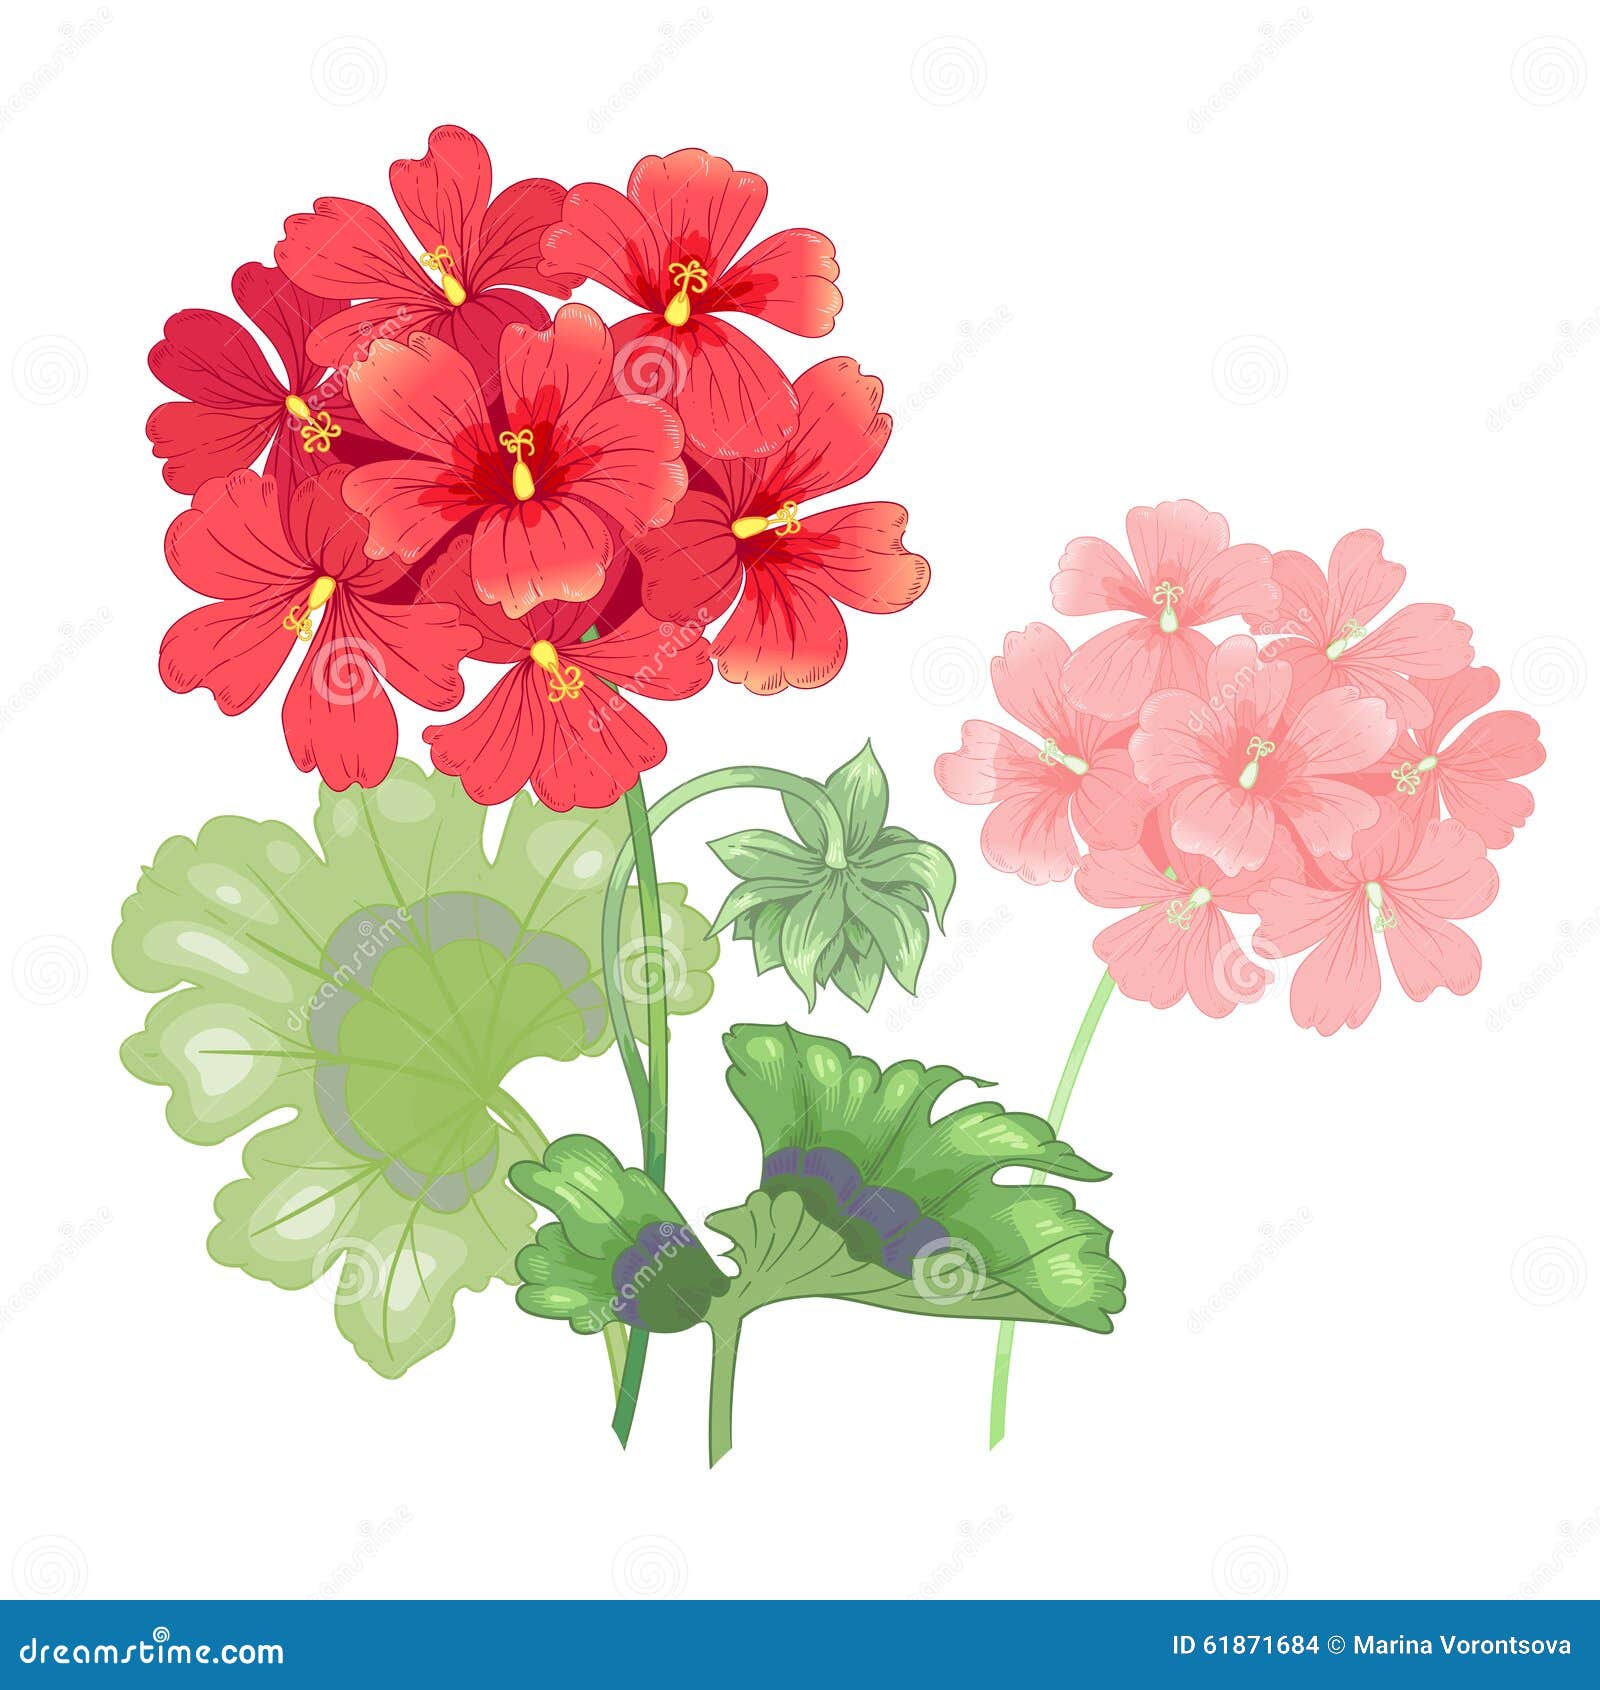 Isolated Geranium Flower On A White Background. Stock Vector